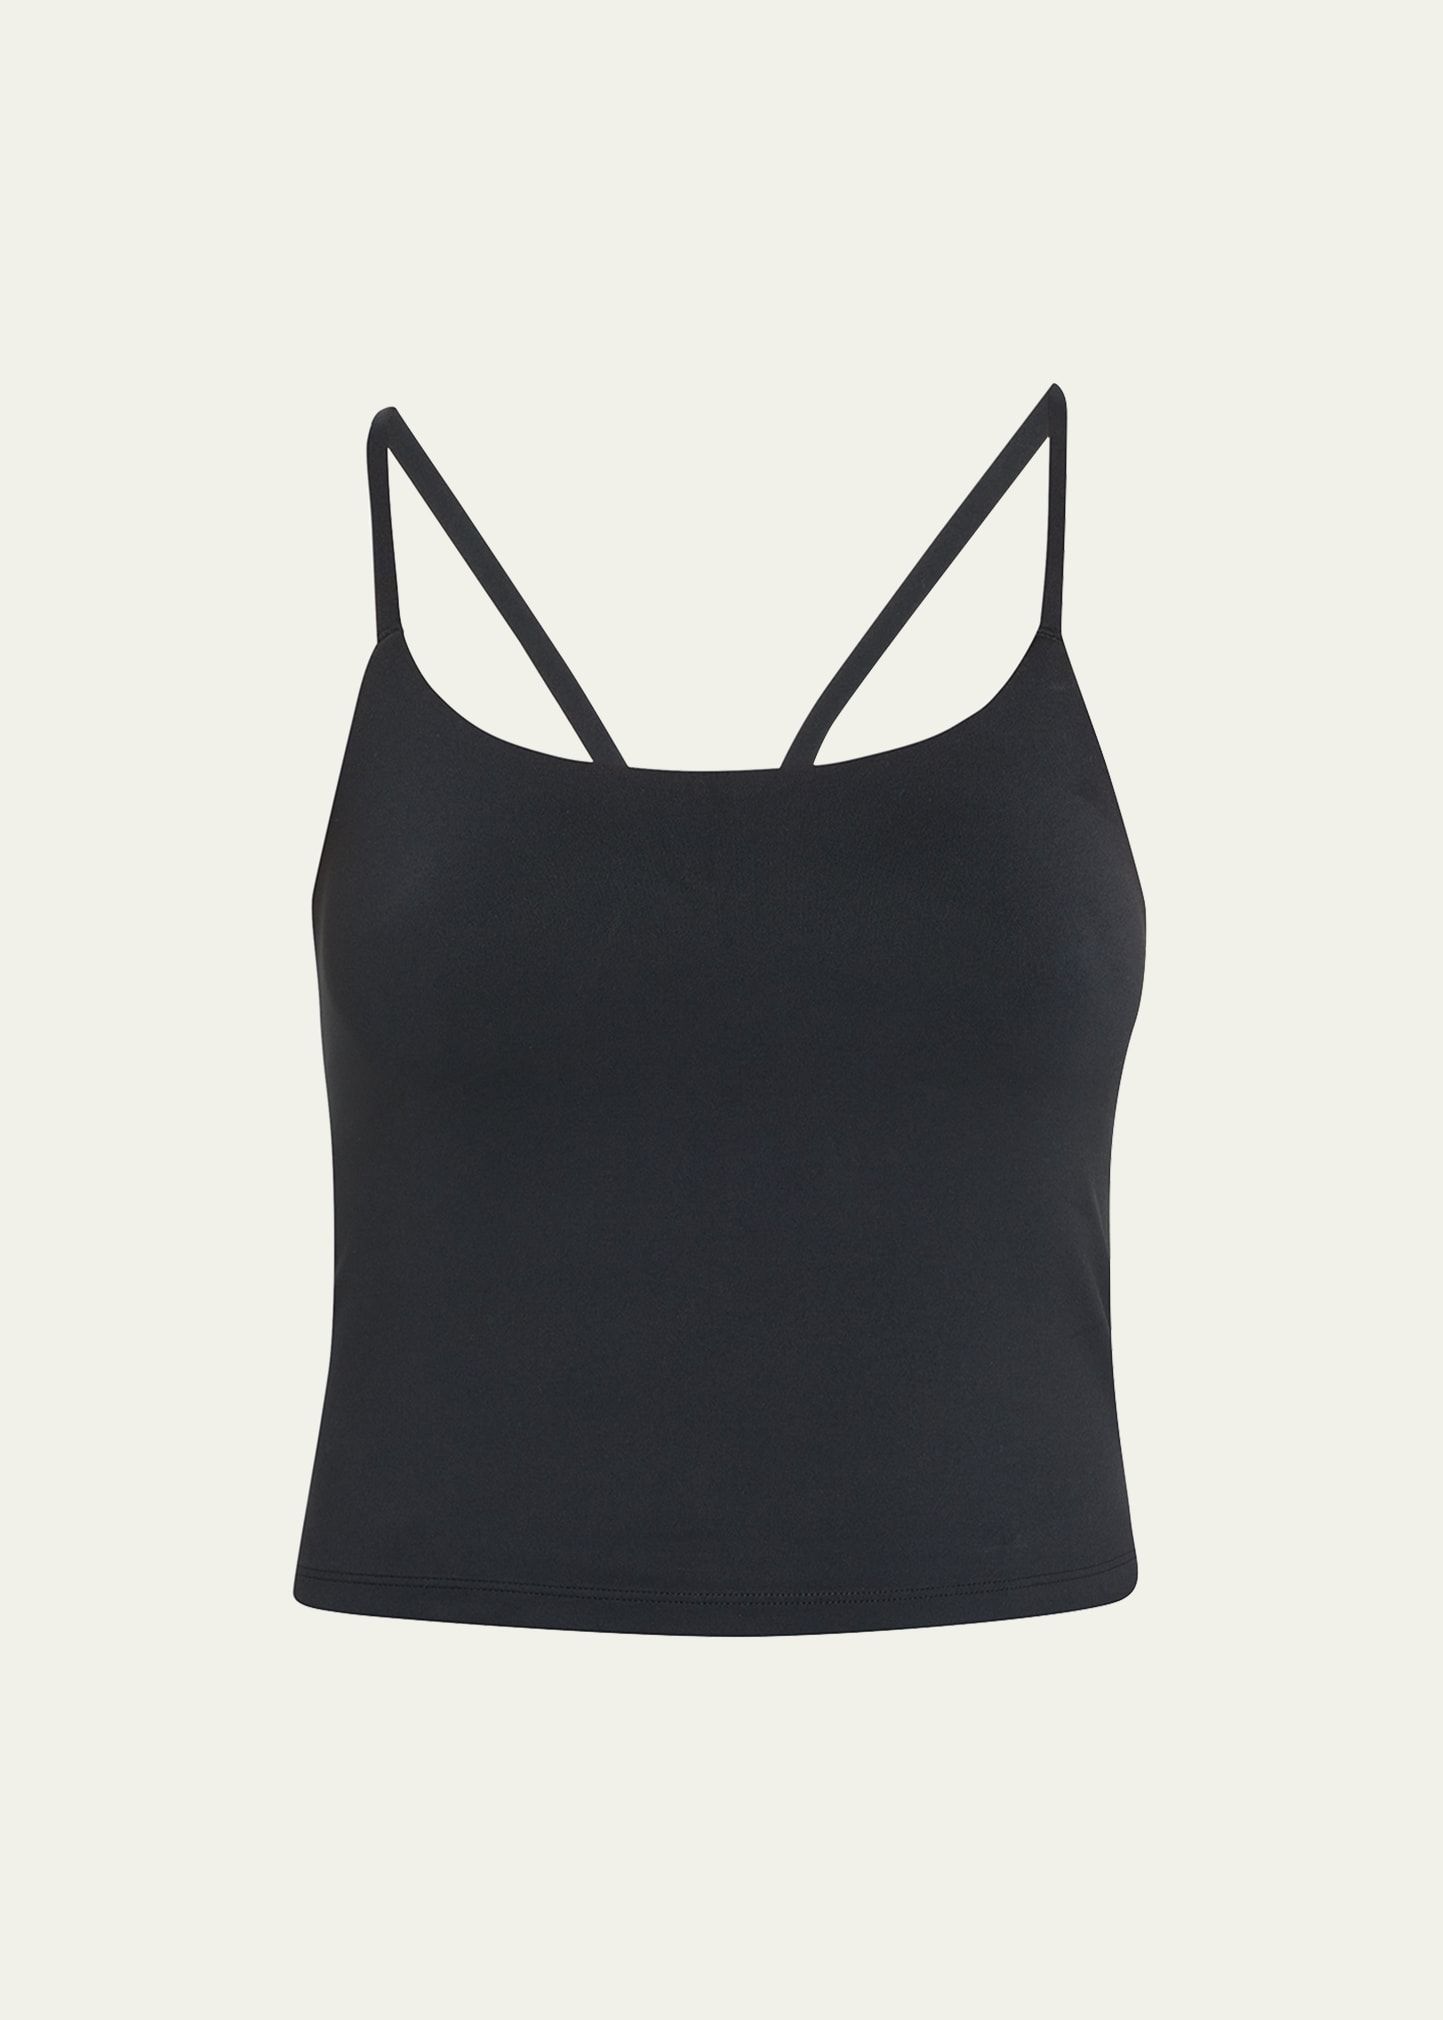 GIRLFRIEND COLLECTIVE WILLA STRAPPY TANK TOP